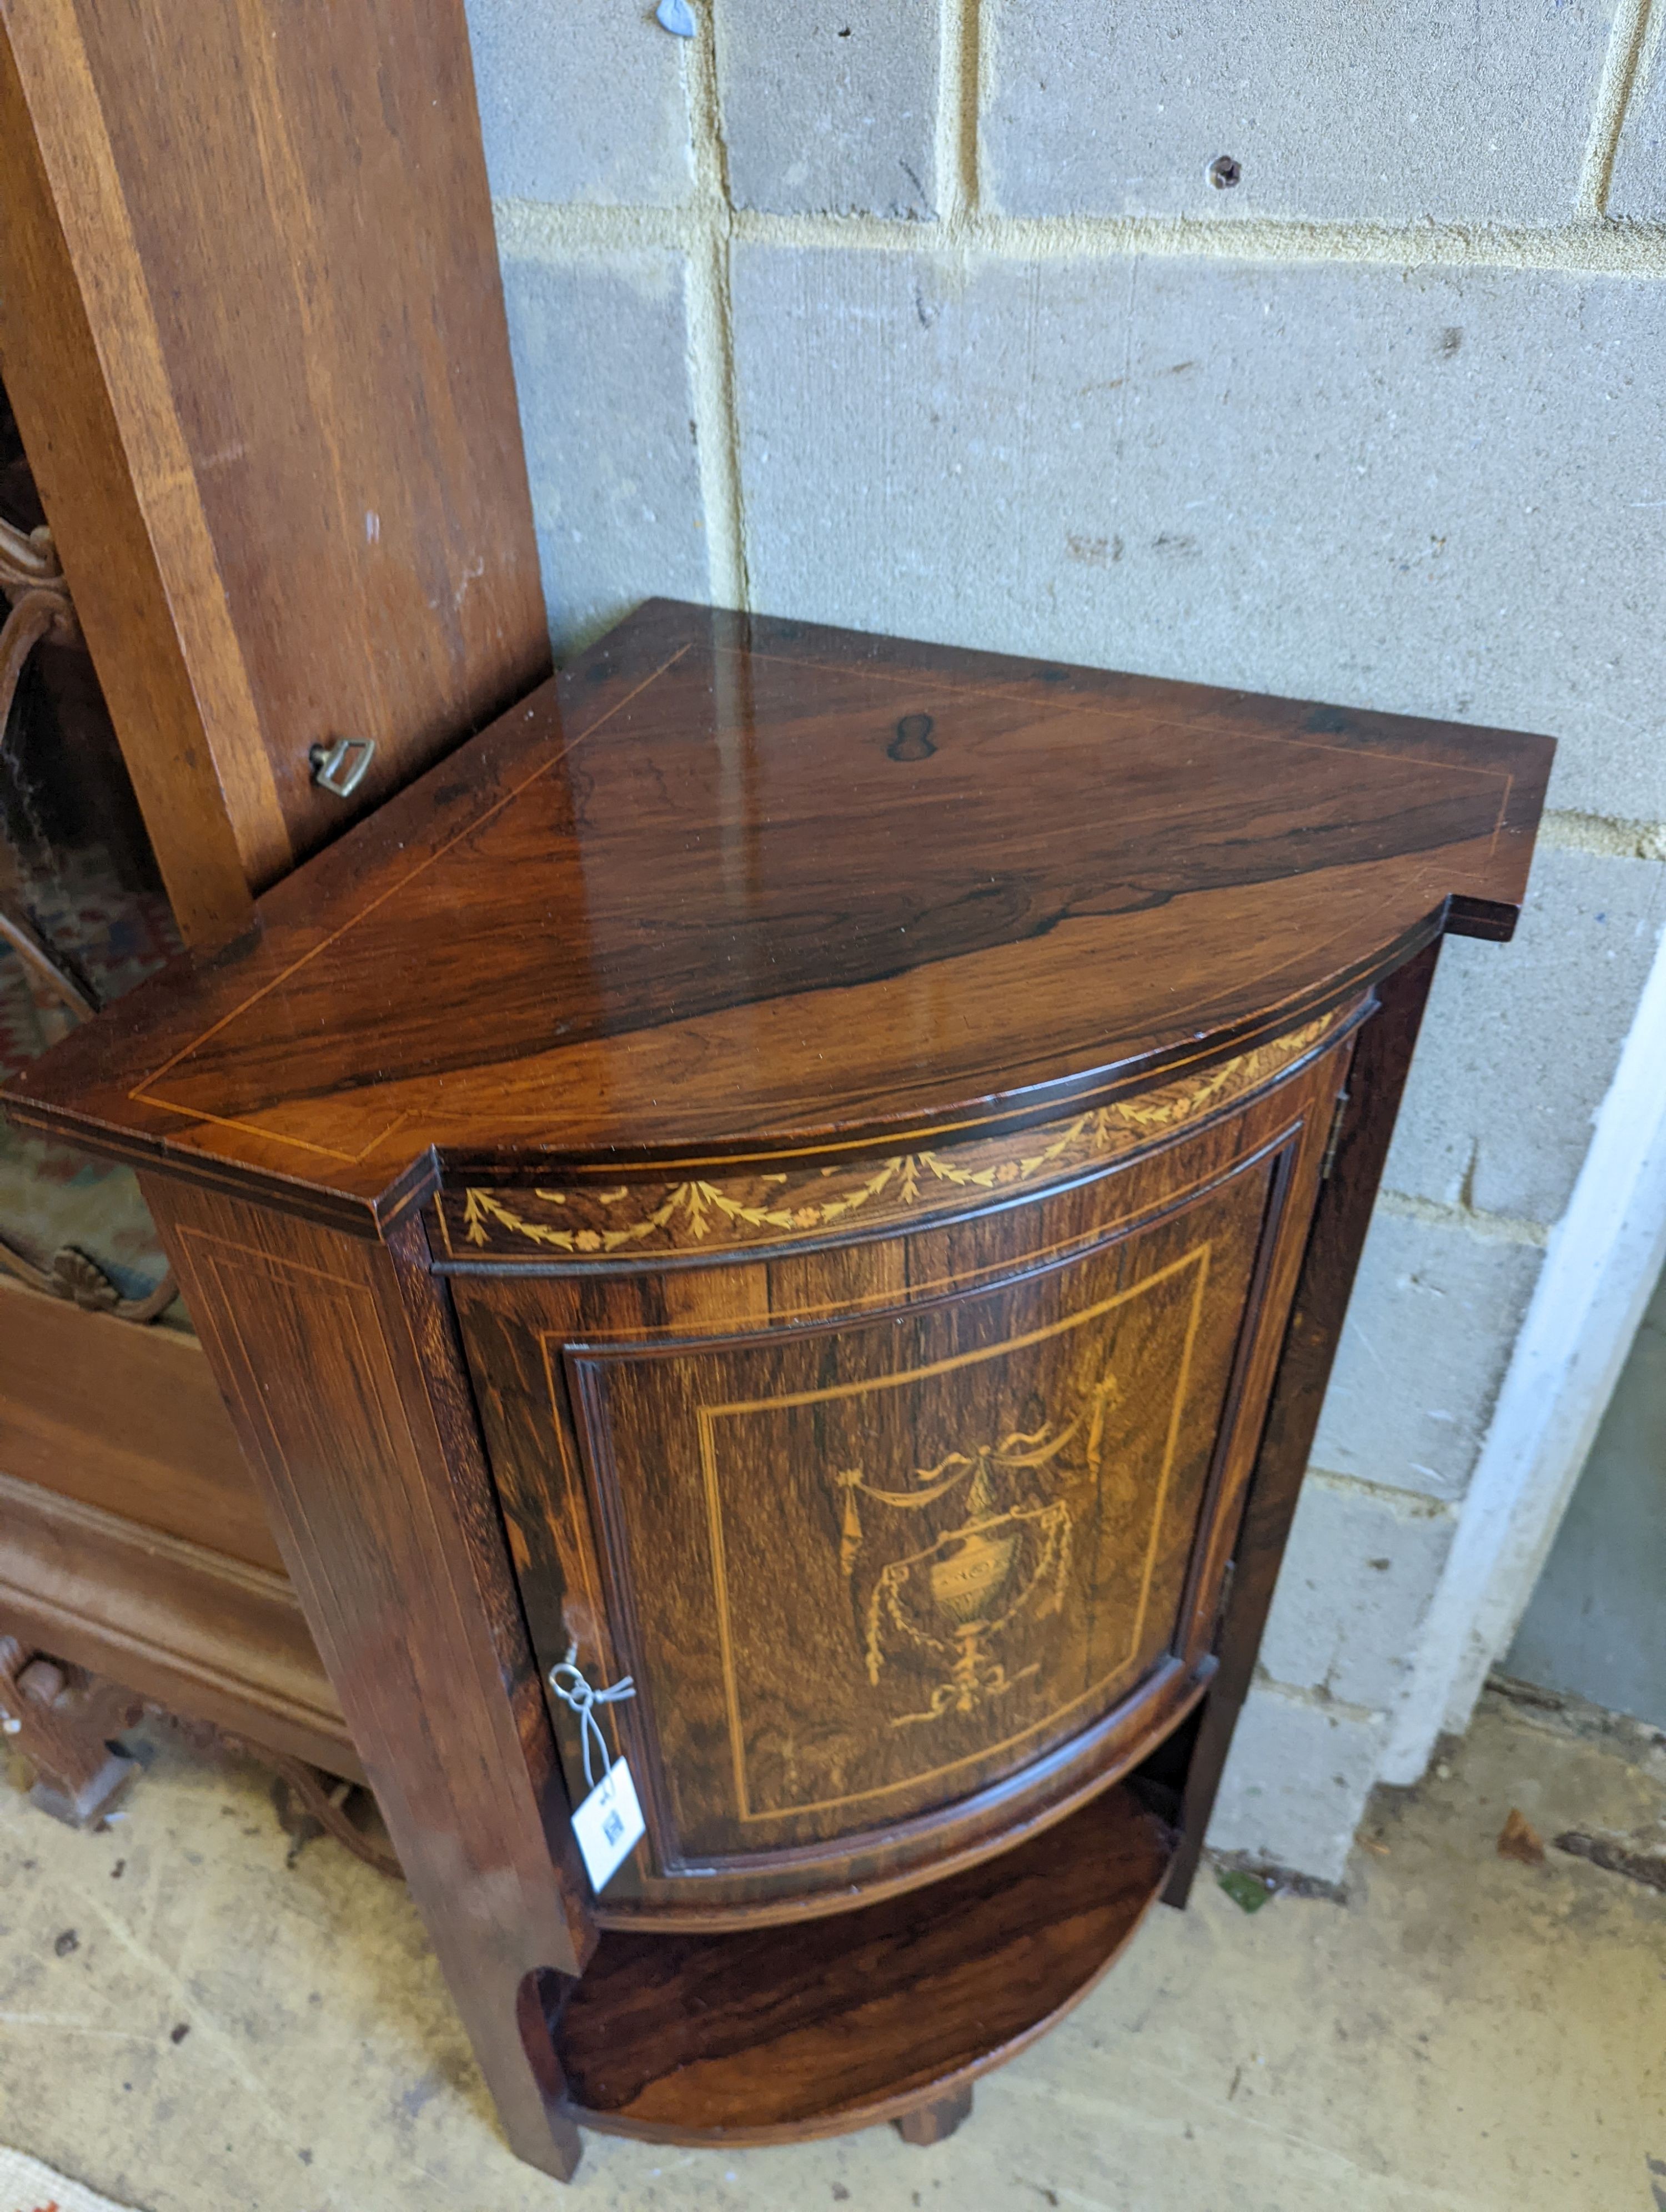 An Edwardian marquetry inlaid rosewood bowfront corner cupboard, width 61cm, depth 43cm, height 97cm